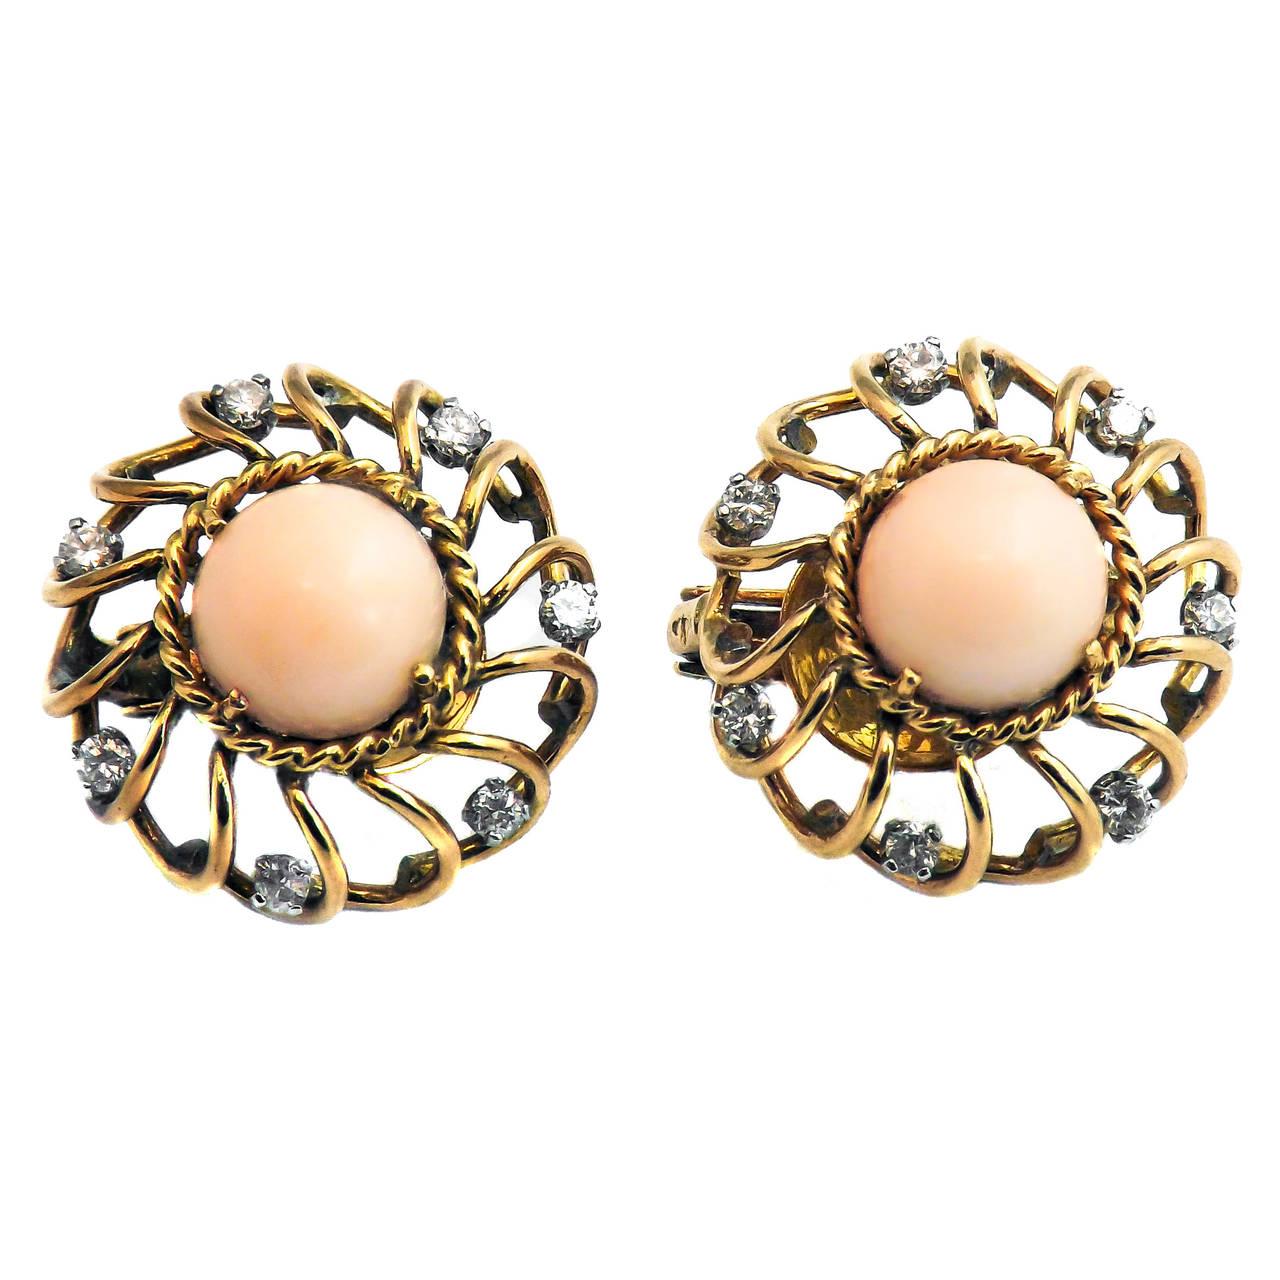 Retro Angle Skin Coral Diamond 18 Karat Gold Earrings In Excellent Condition For Sale In New York, NY